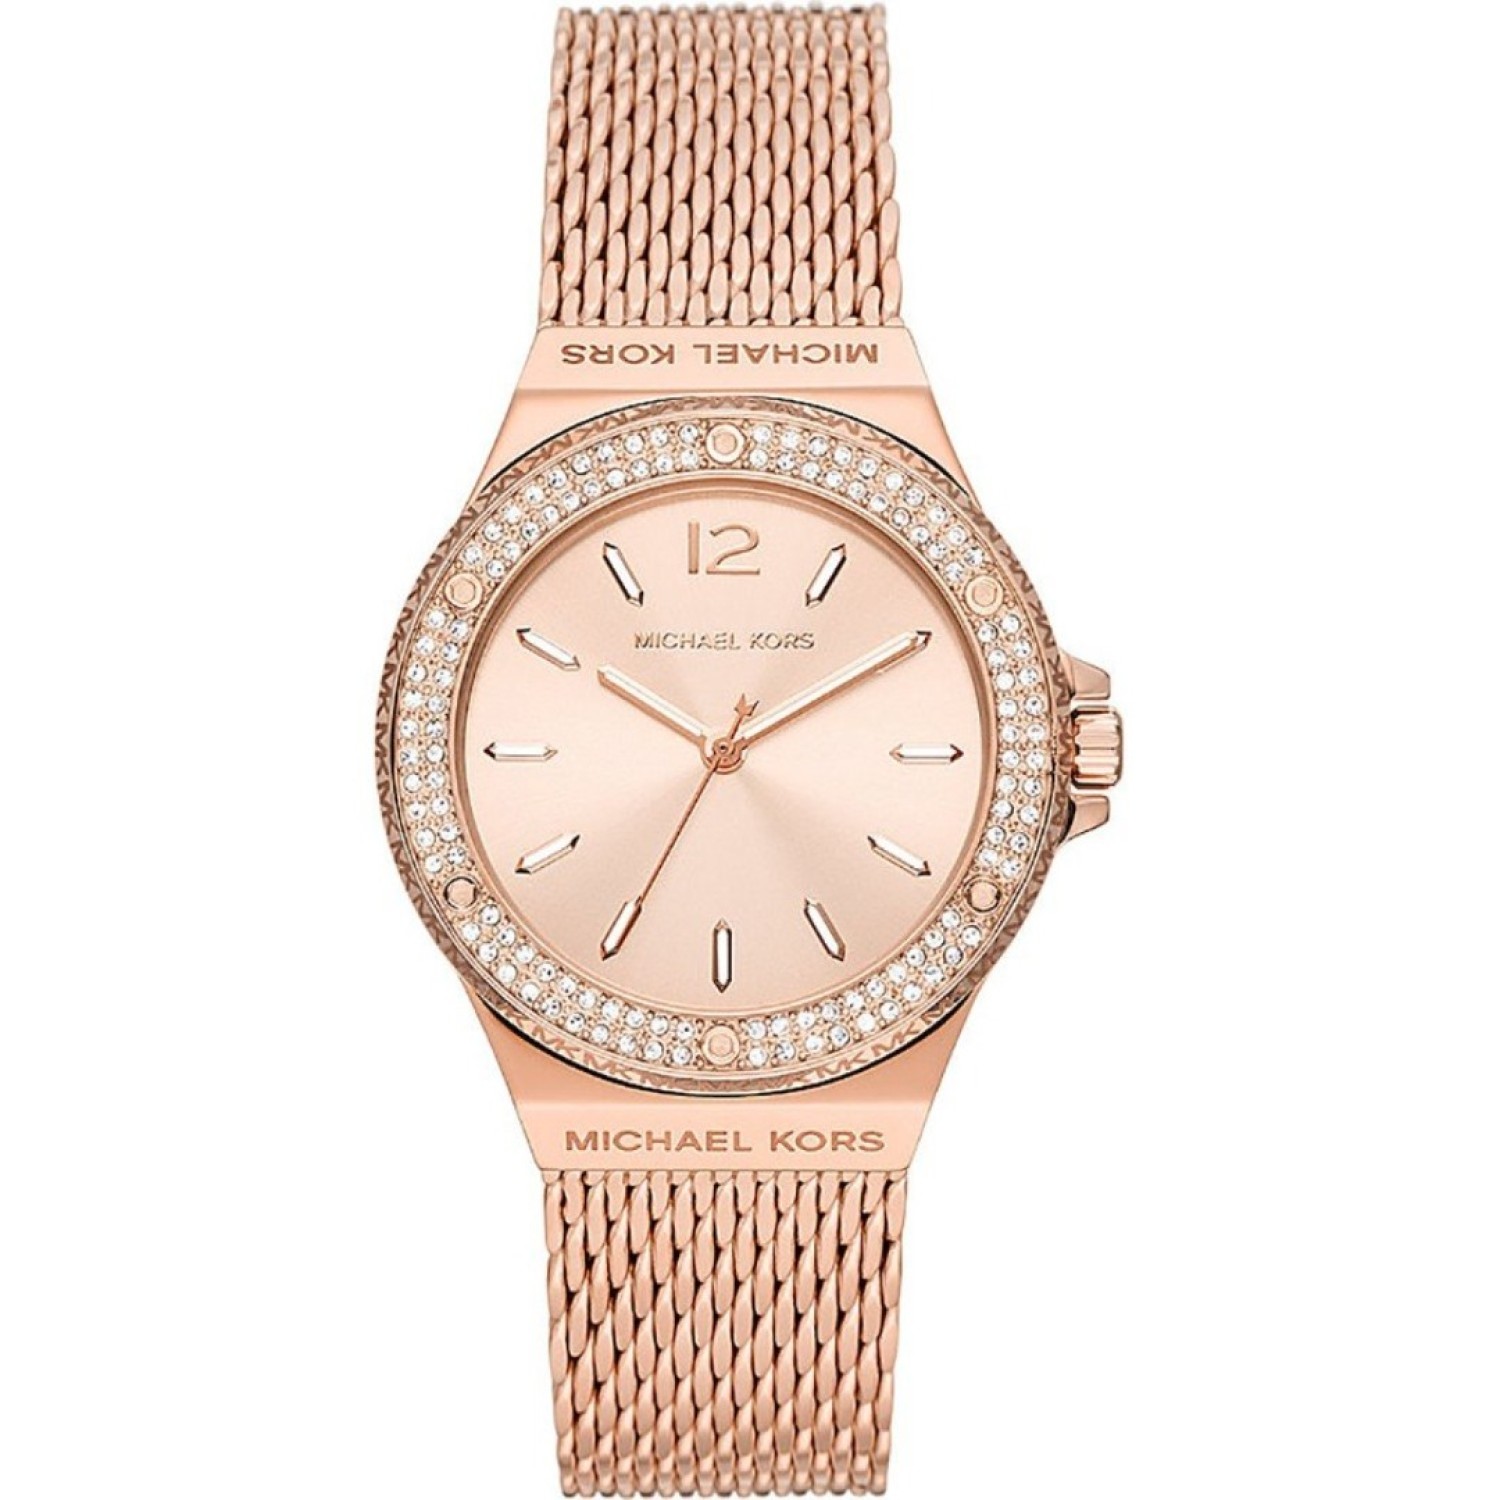 MK7336 Michael KorsLennox Rose Gold-Tone Watch. MK7336 Michael Kors Lennox Three-Hand Rose Gold-Tone Stainless Steel Watch Afterpay - Split your purchase into 4 instalments - Pay for your purchase over 4 instalments, due every two weeks.